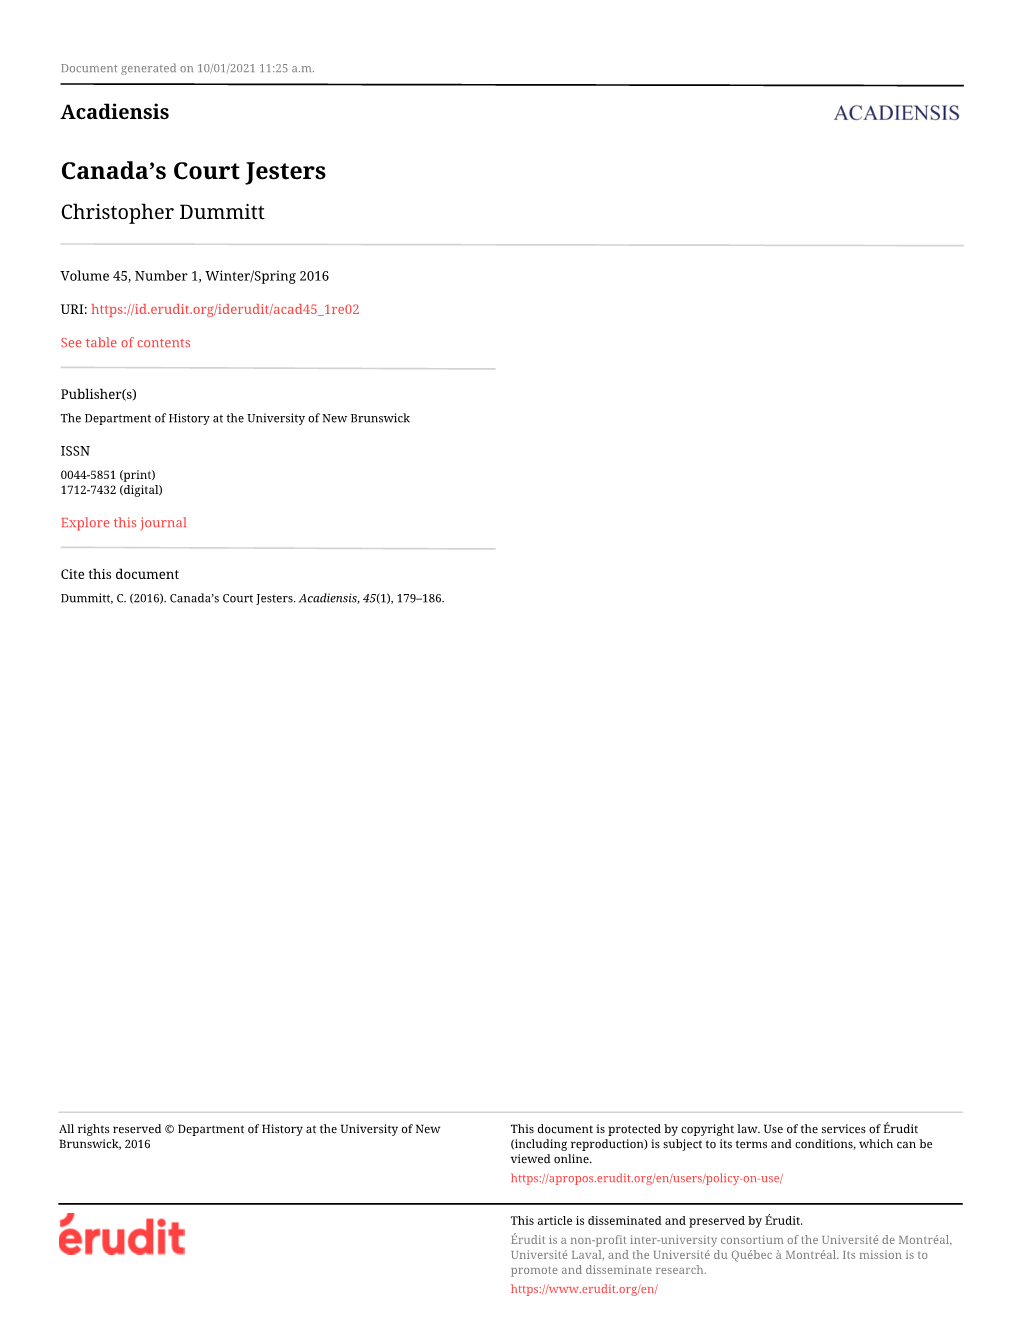 Canada's Court Jesters